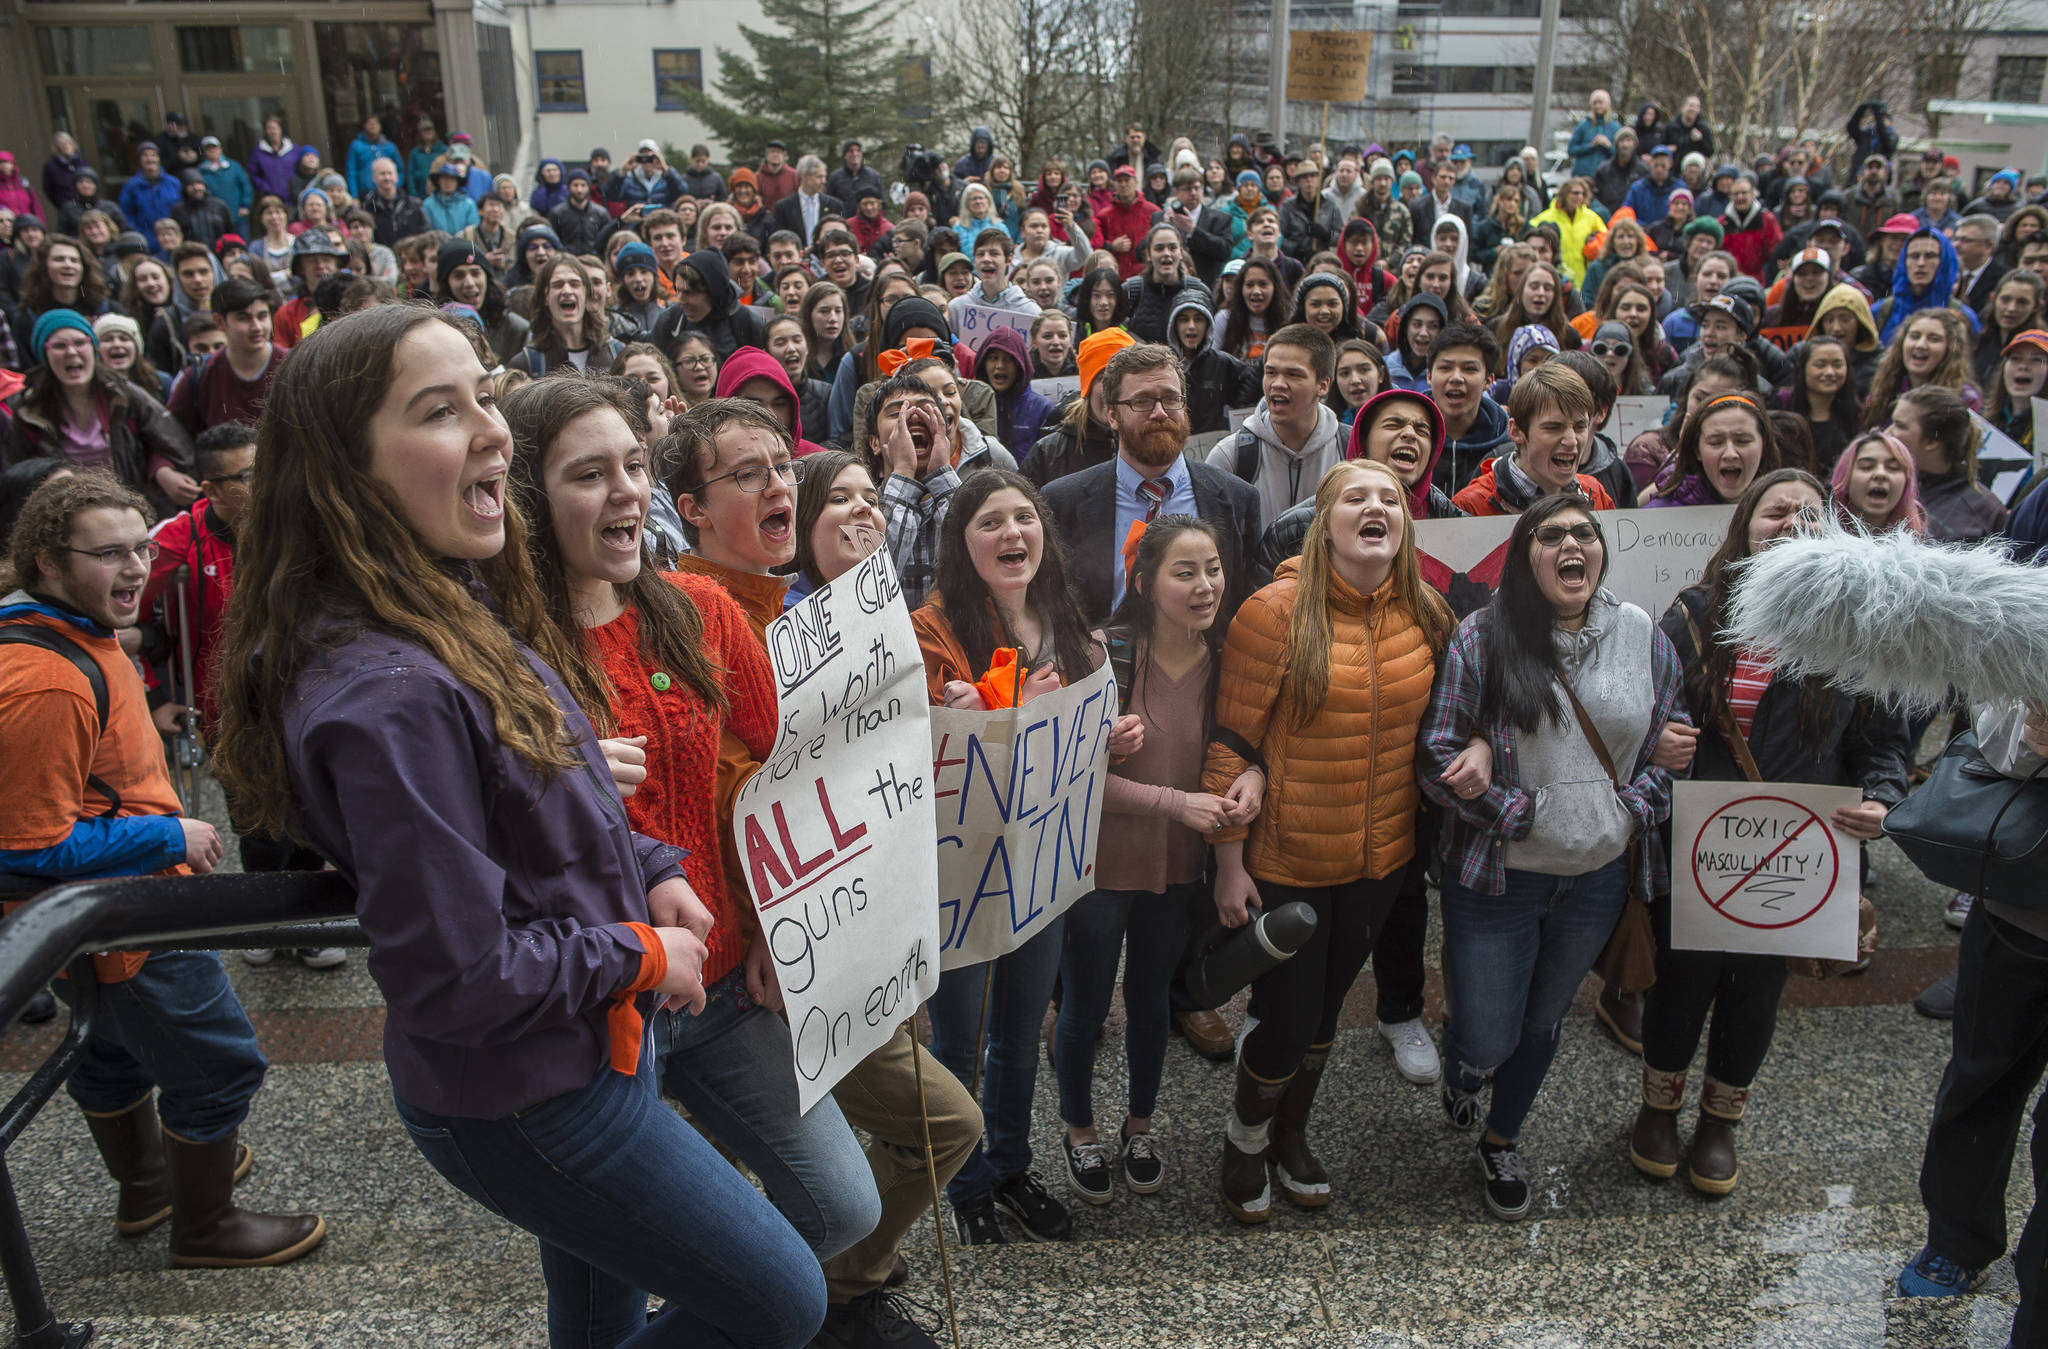 Juneau-Douglas High School students lock arms and shout “we want to live” during the National School Walk Out in front of the Capitol on Wednesday, March 14, 2018. The students marched from school to the Capitol in support of the 17 victims of the Marjory Stoneman Douglas High School shooting one month ago. (Michael Penn | Juneau Empire)